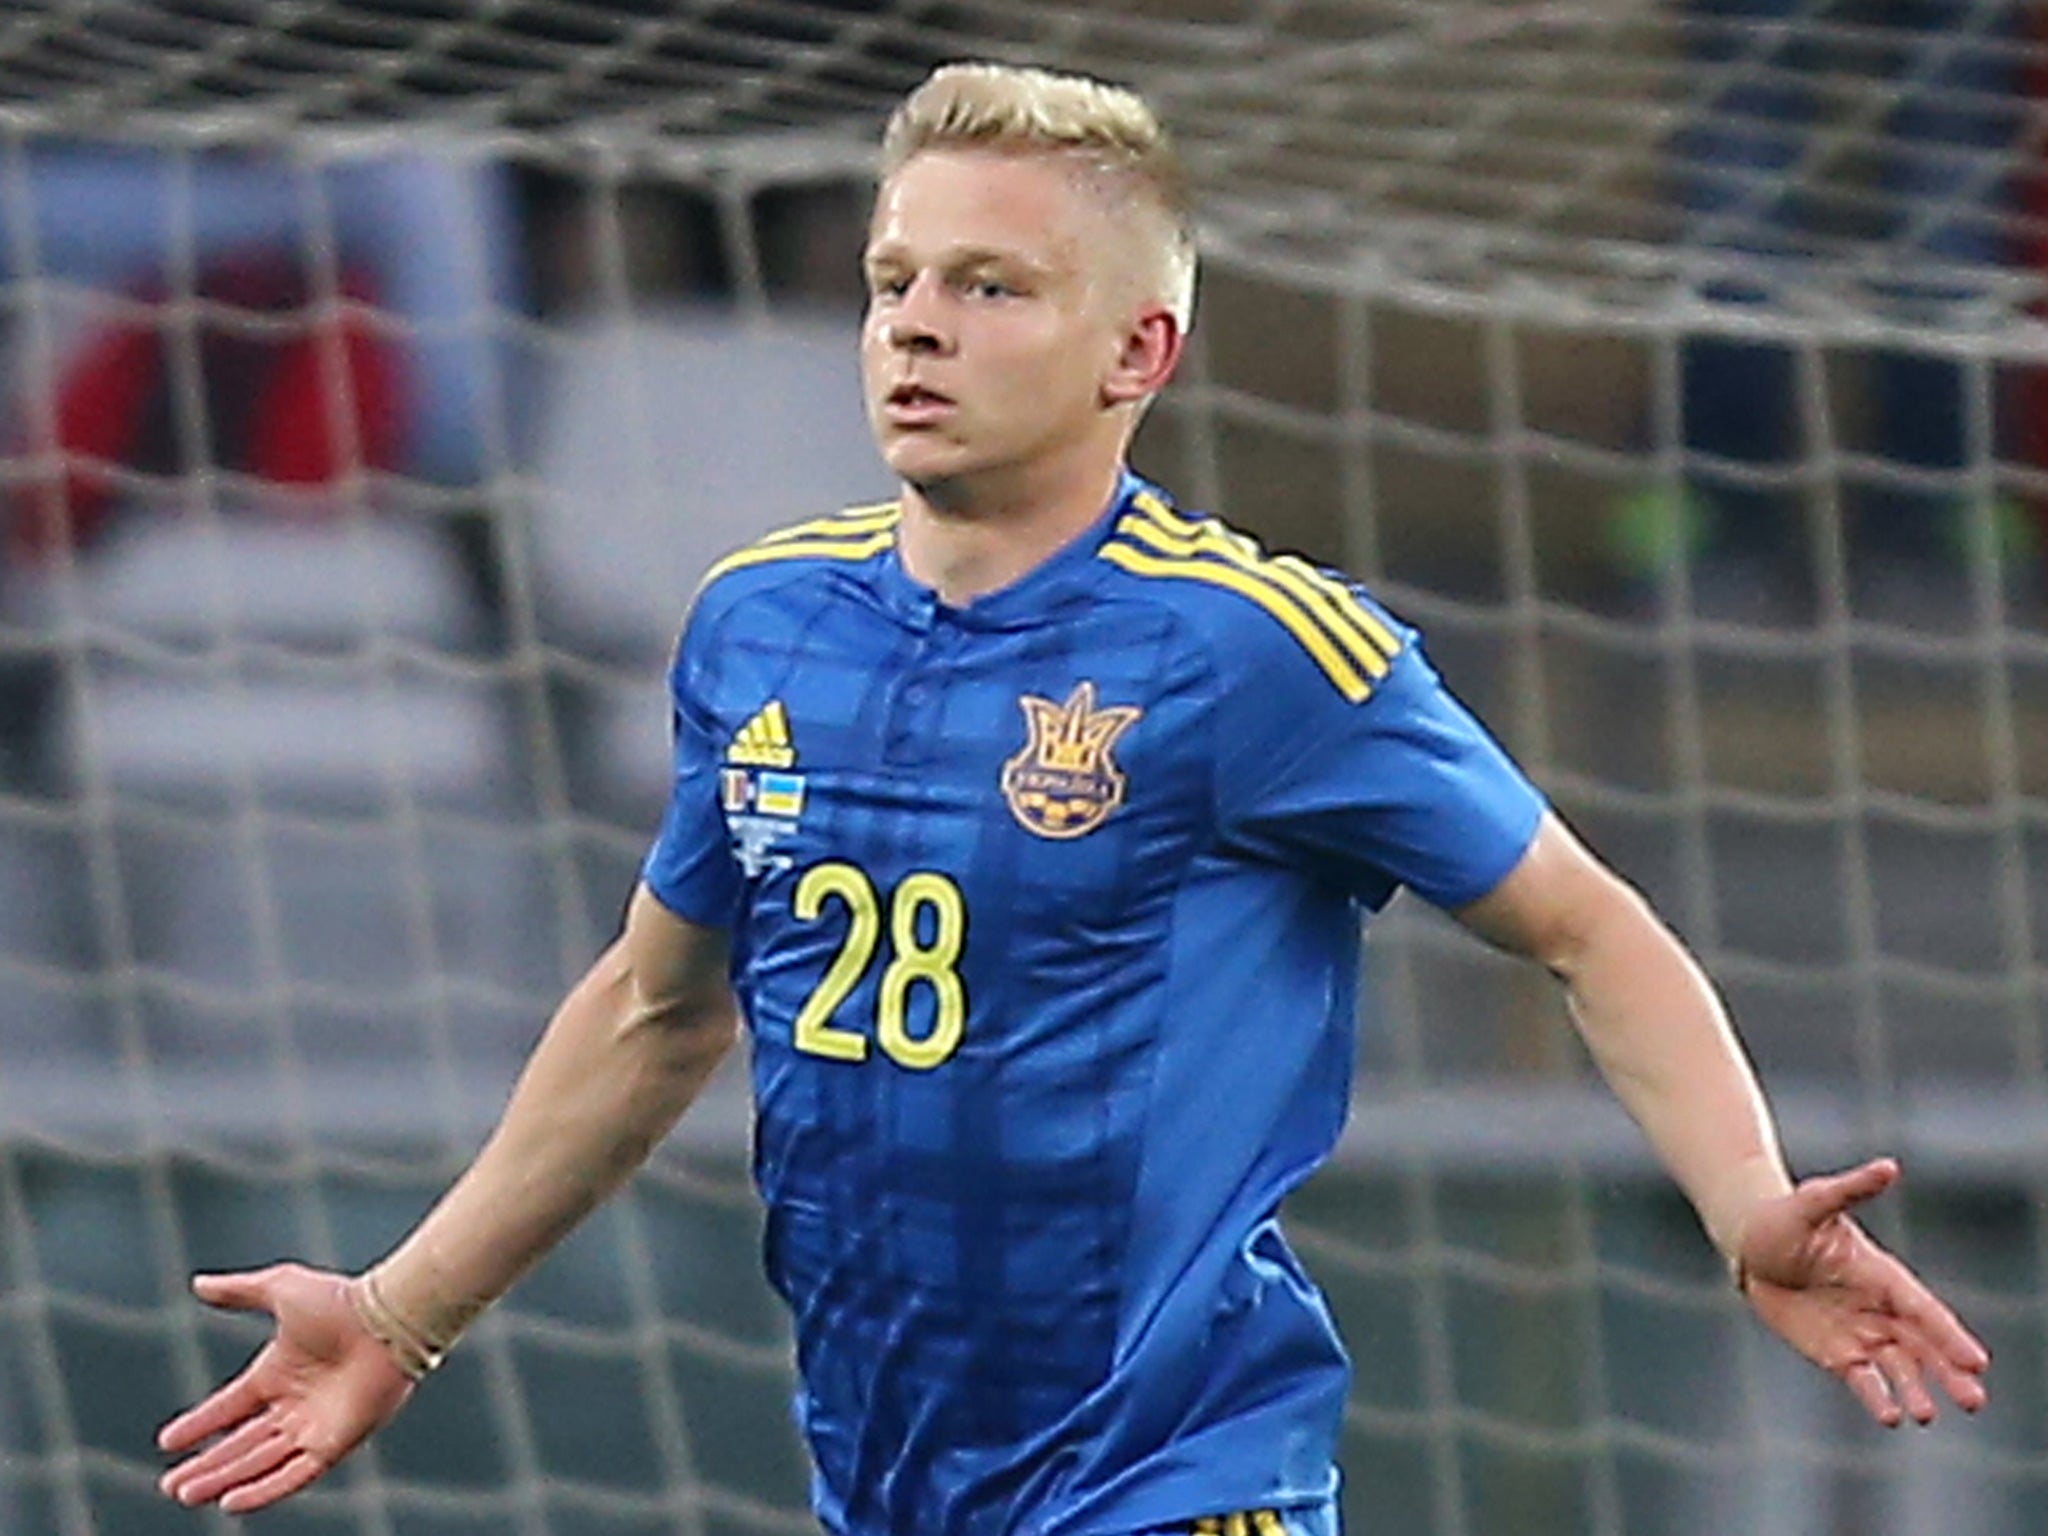 Zinchenko scored his first international goal against Romania in May